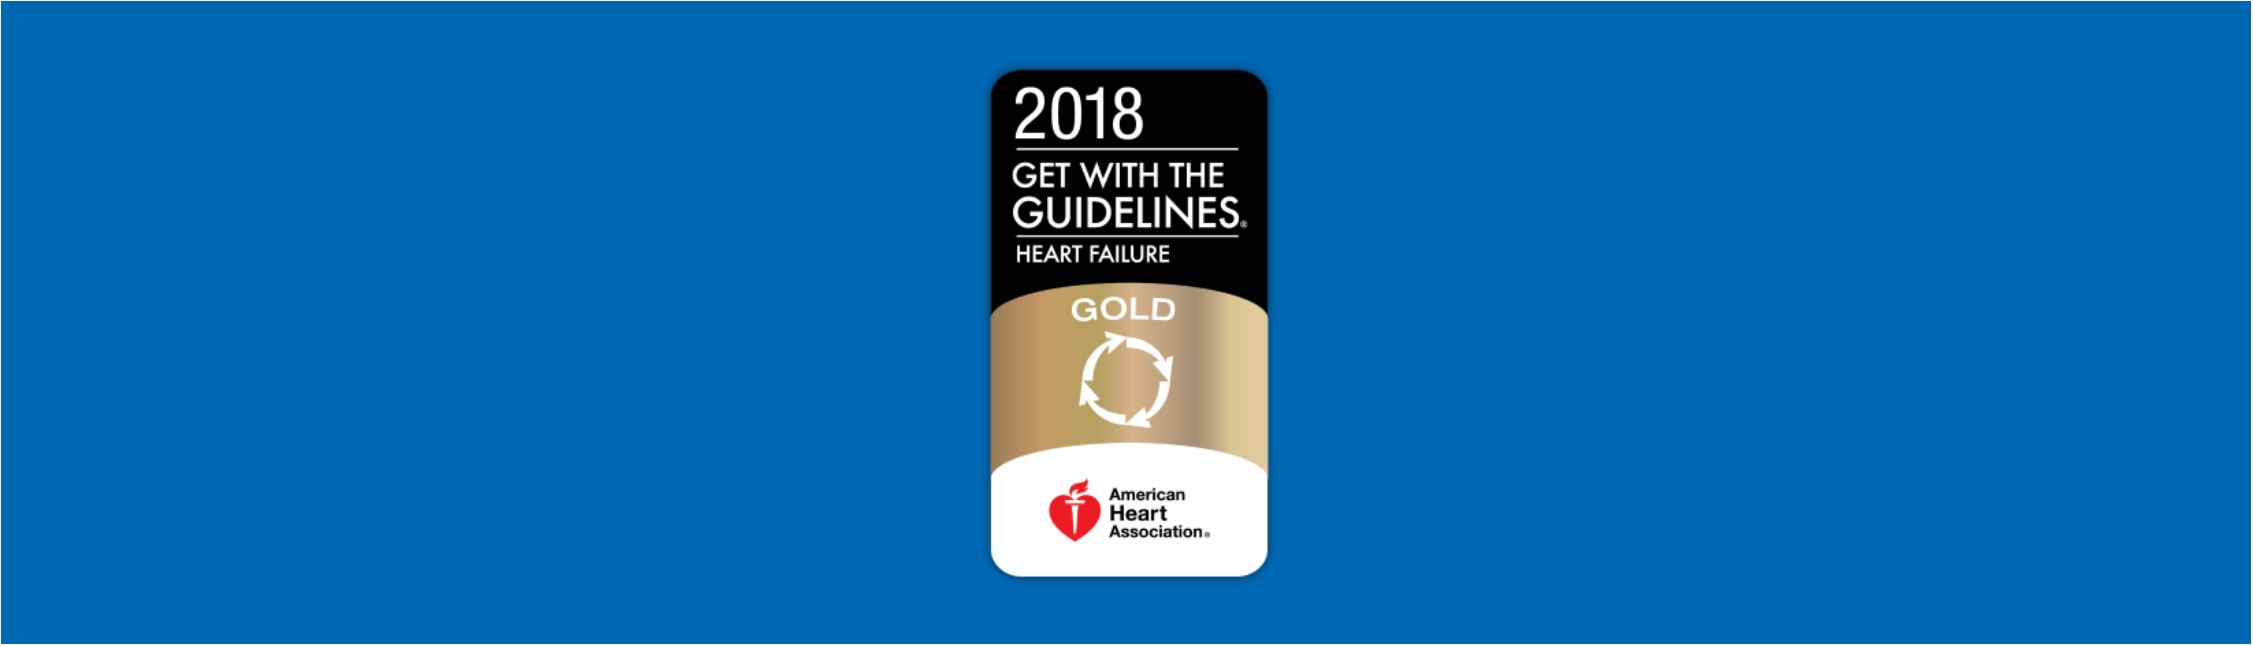 Get With The Guidelines-Heart Failure Gold Quality Achievement Award